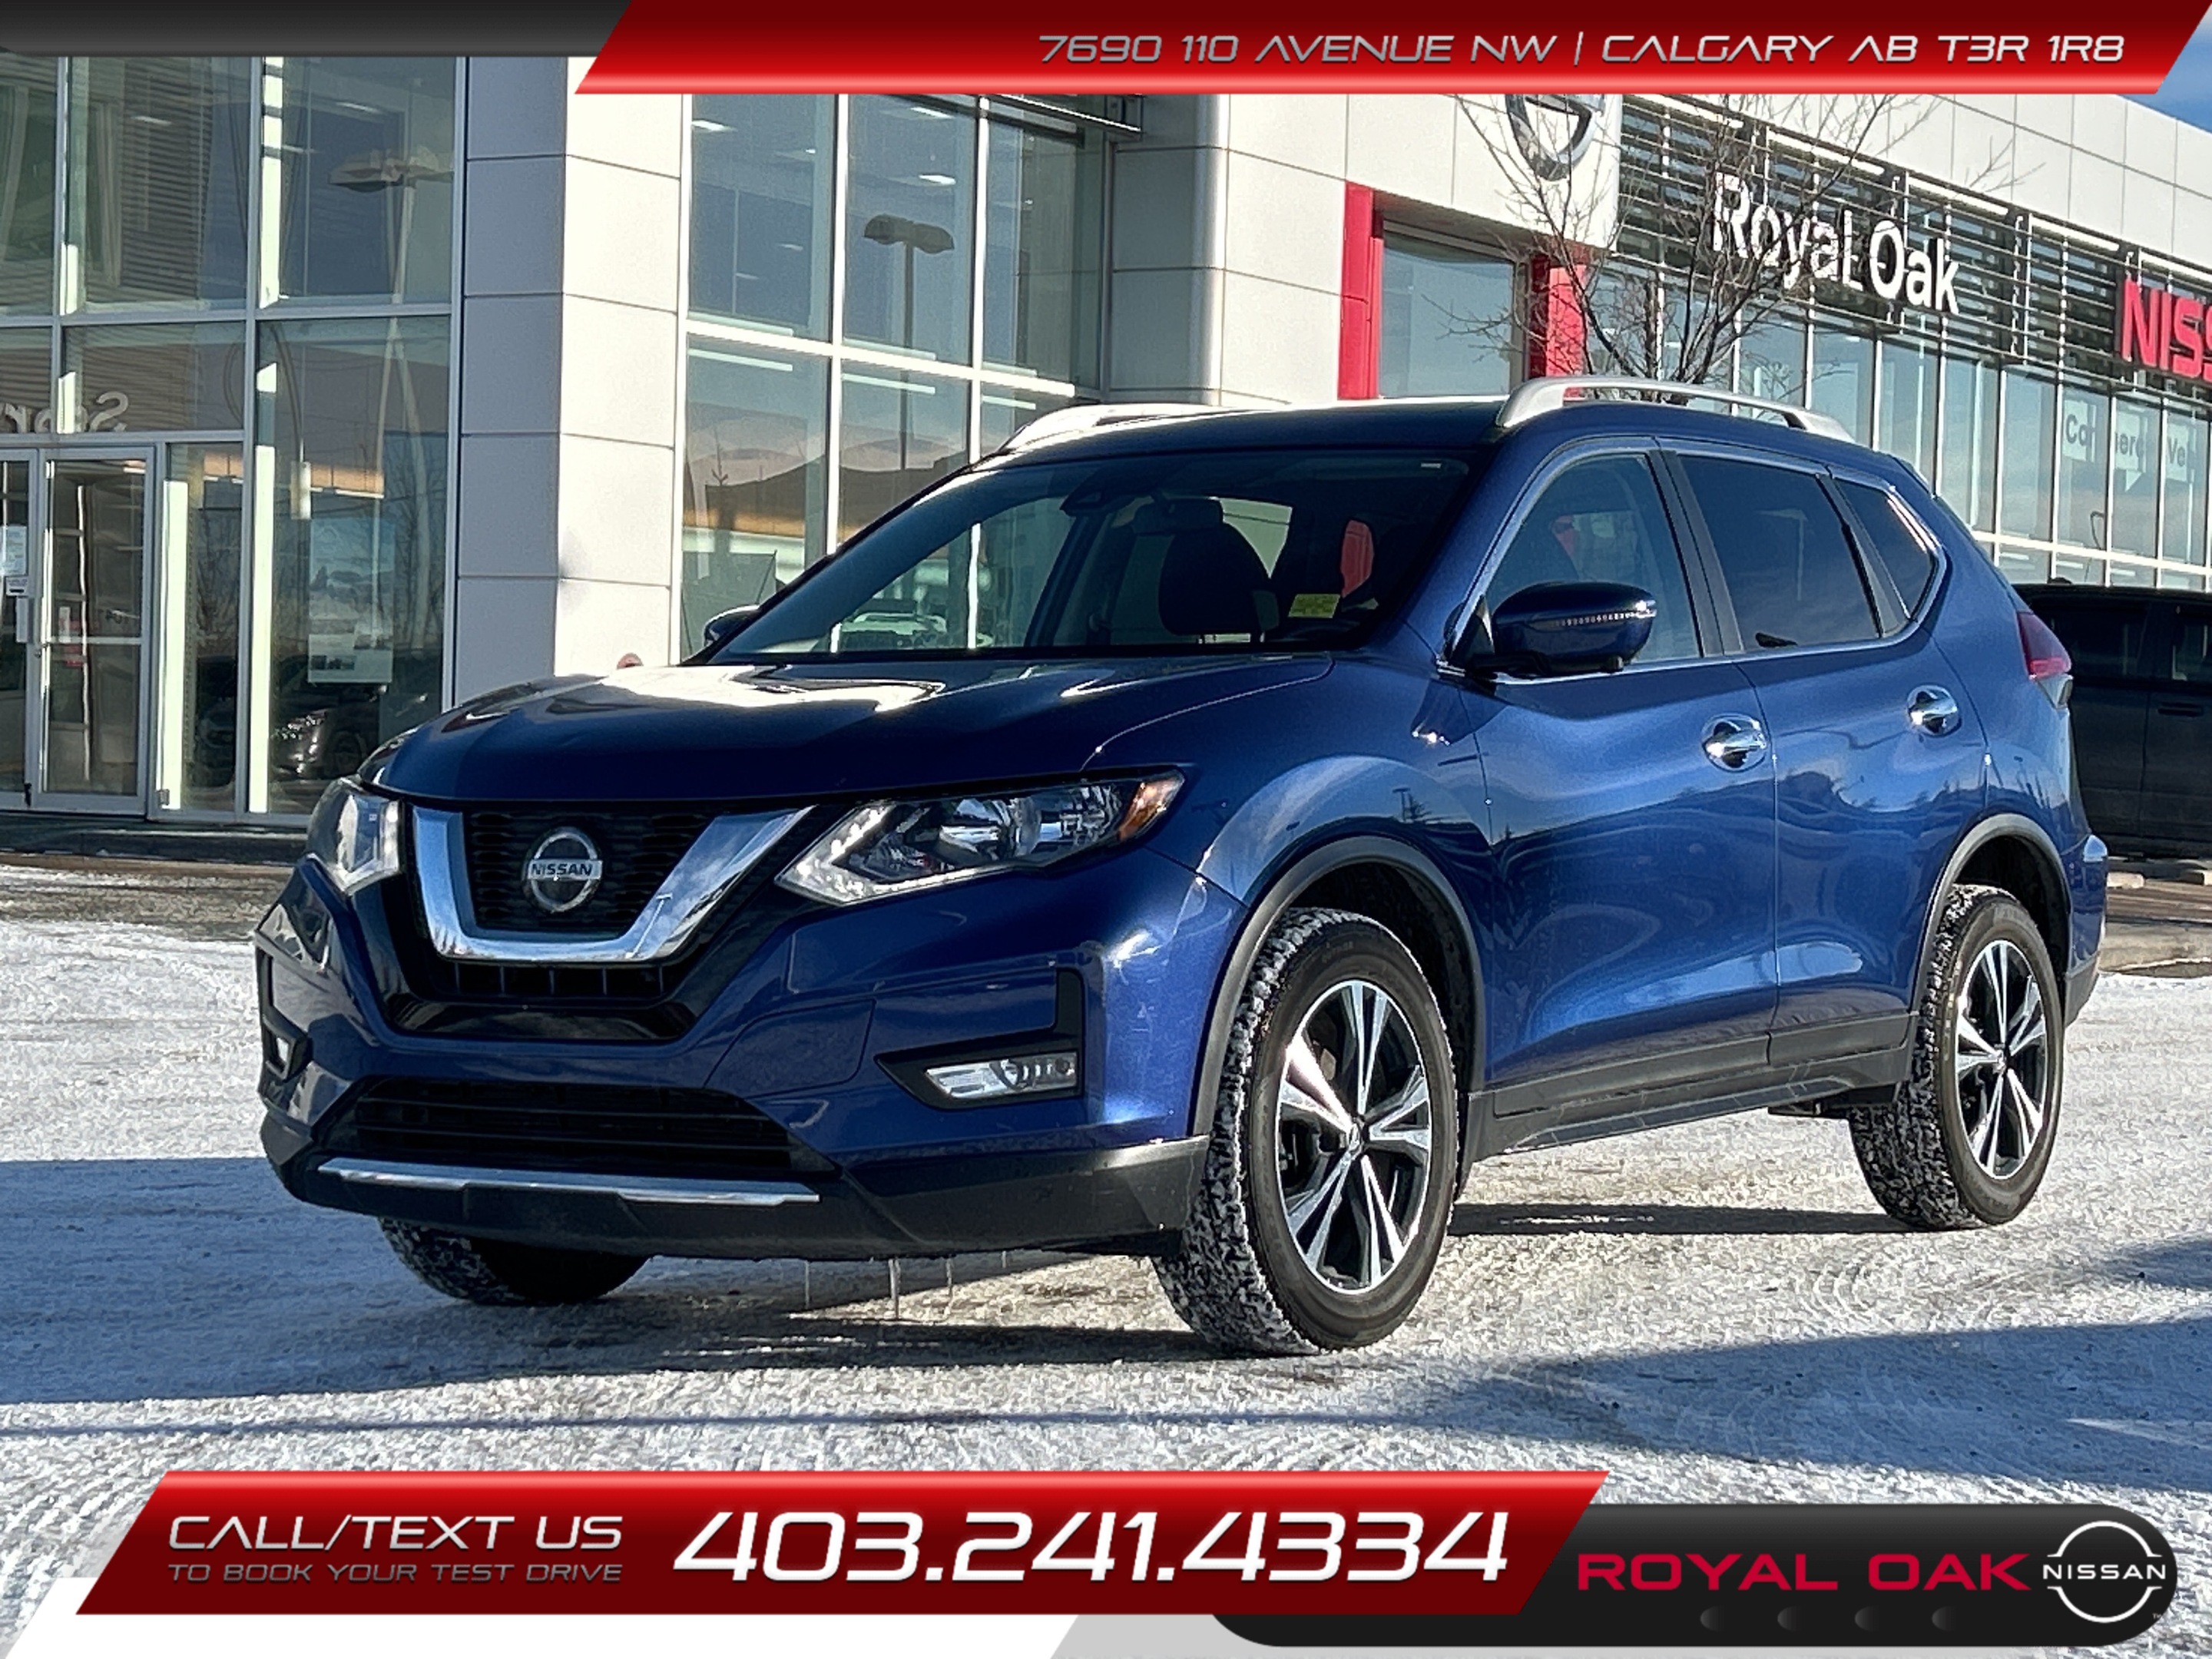 2020 Nissan Rogue SV AWD - Certified Pre-Owned Vehicle (CPO)